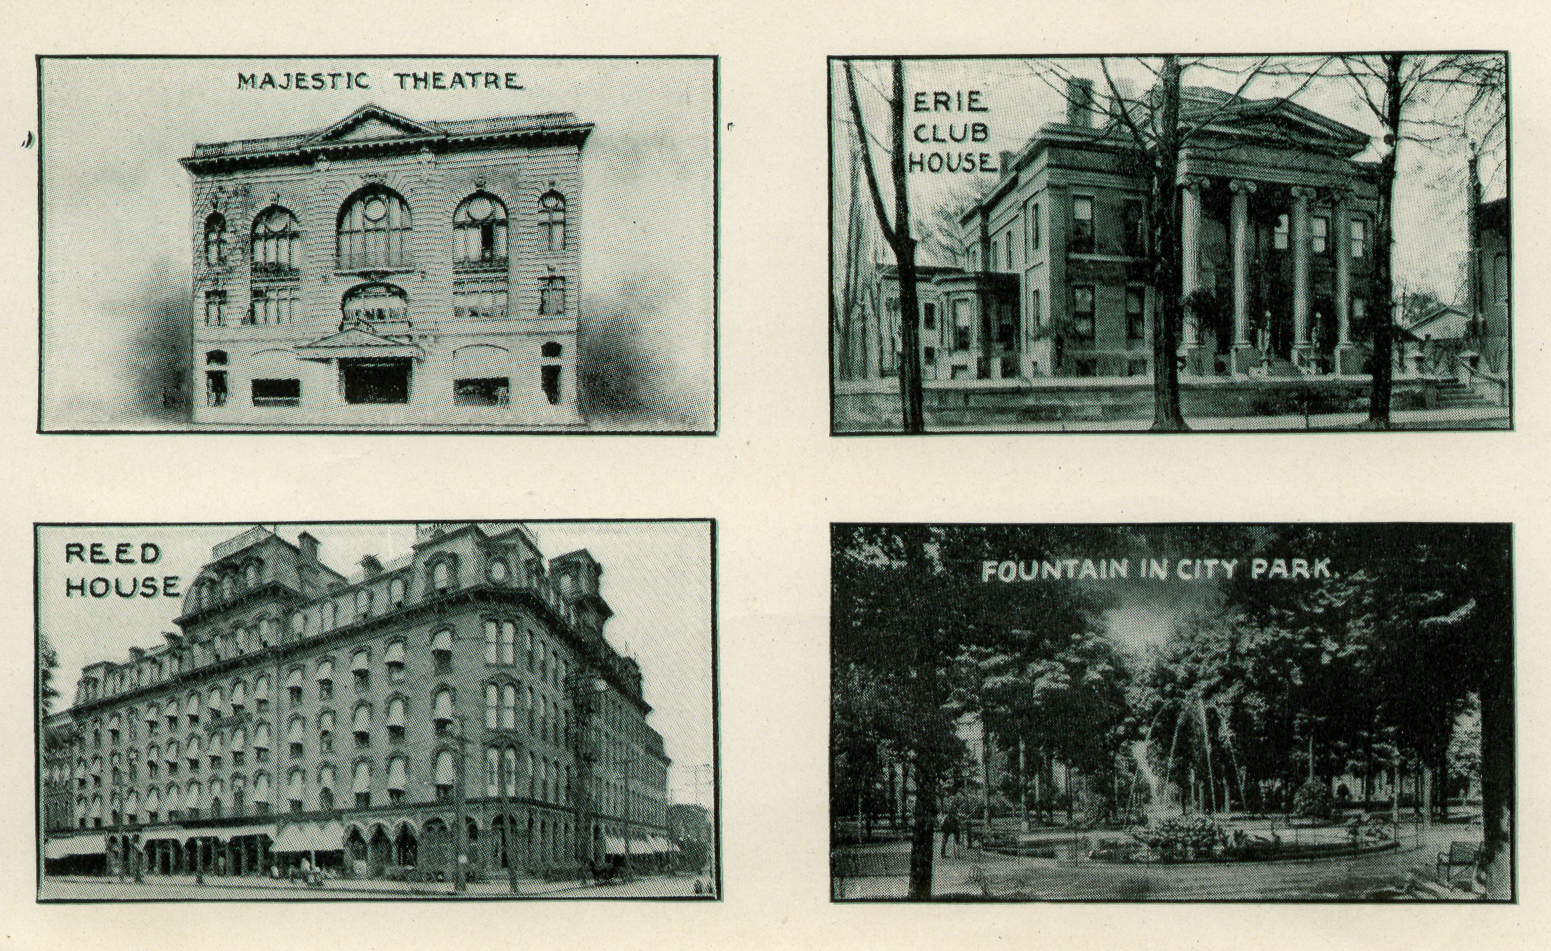 Majestic Theatre, Erie Club House, Reed House, Fountain in City Park, Erie PA